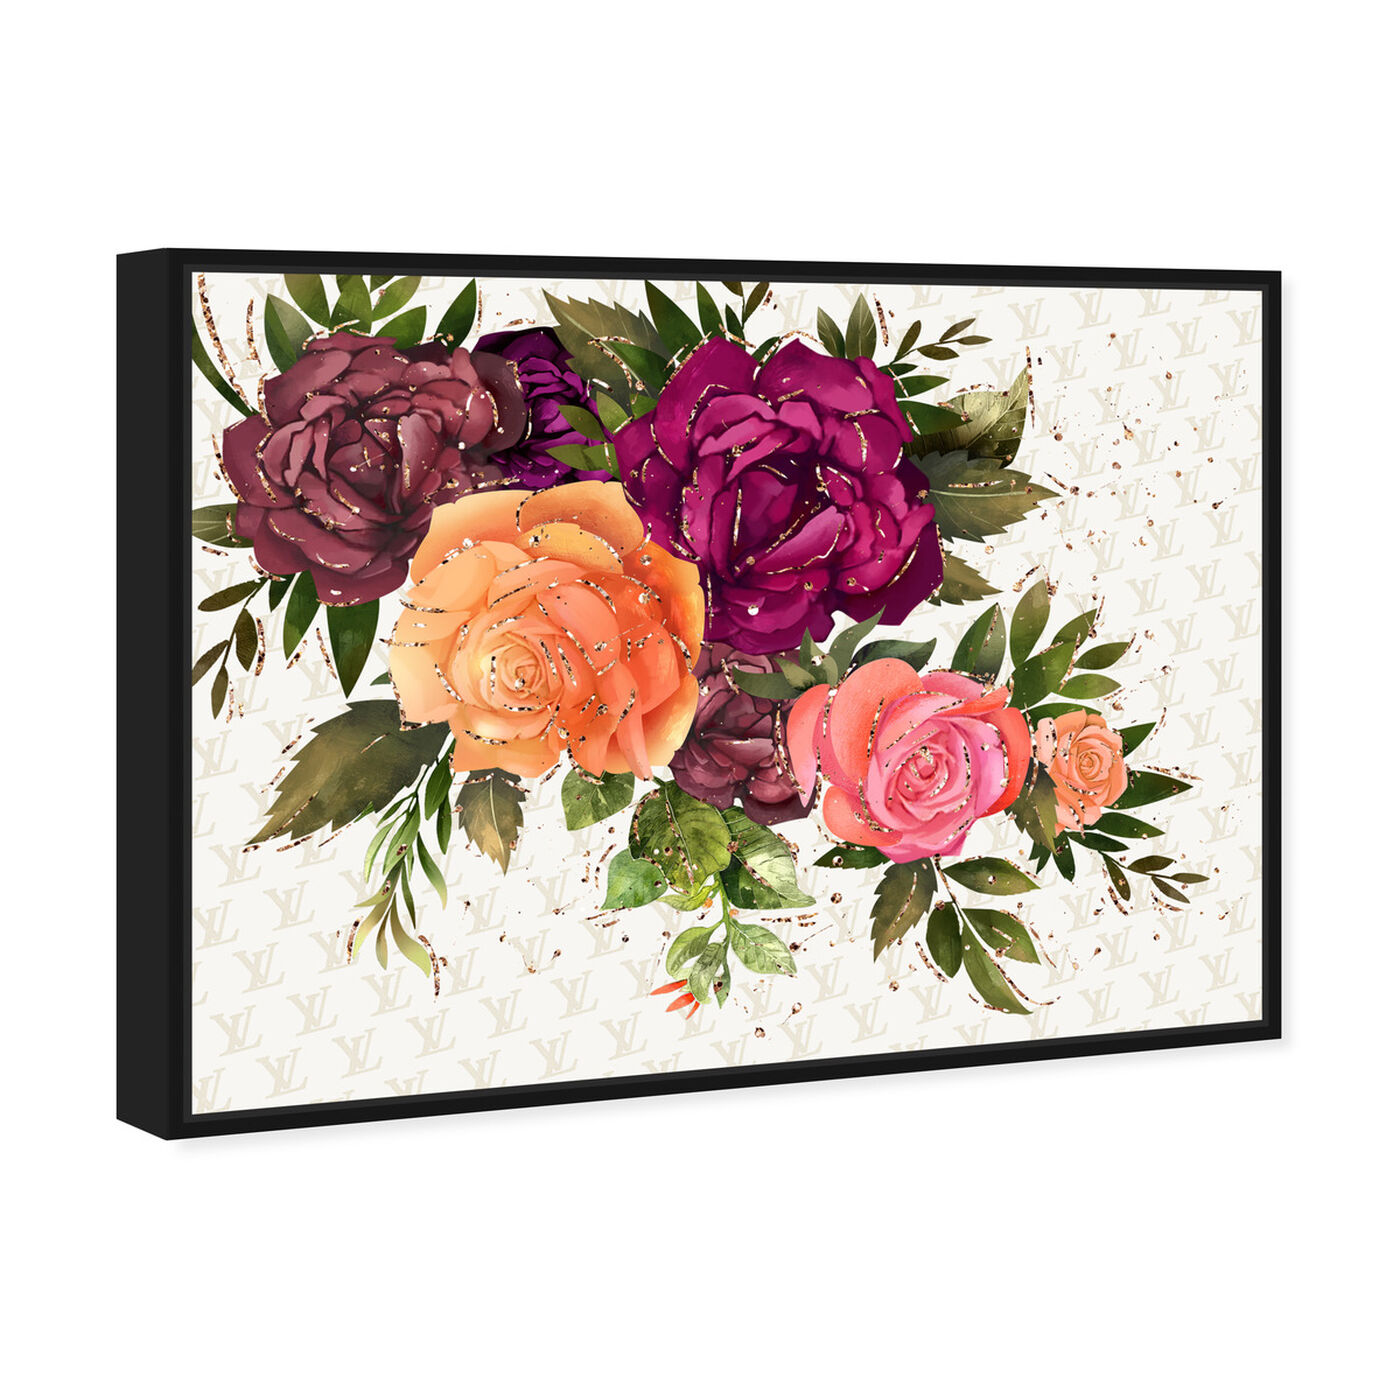 Angled view of Royal Roses featuring fashion and glam and lifestyle art.